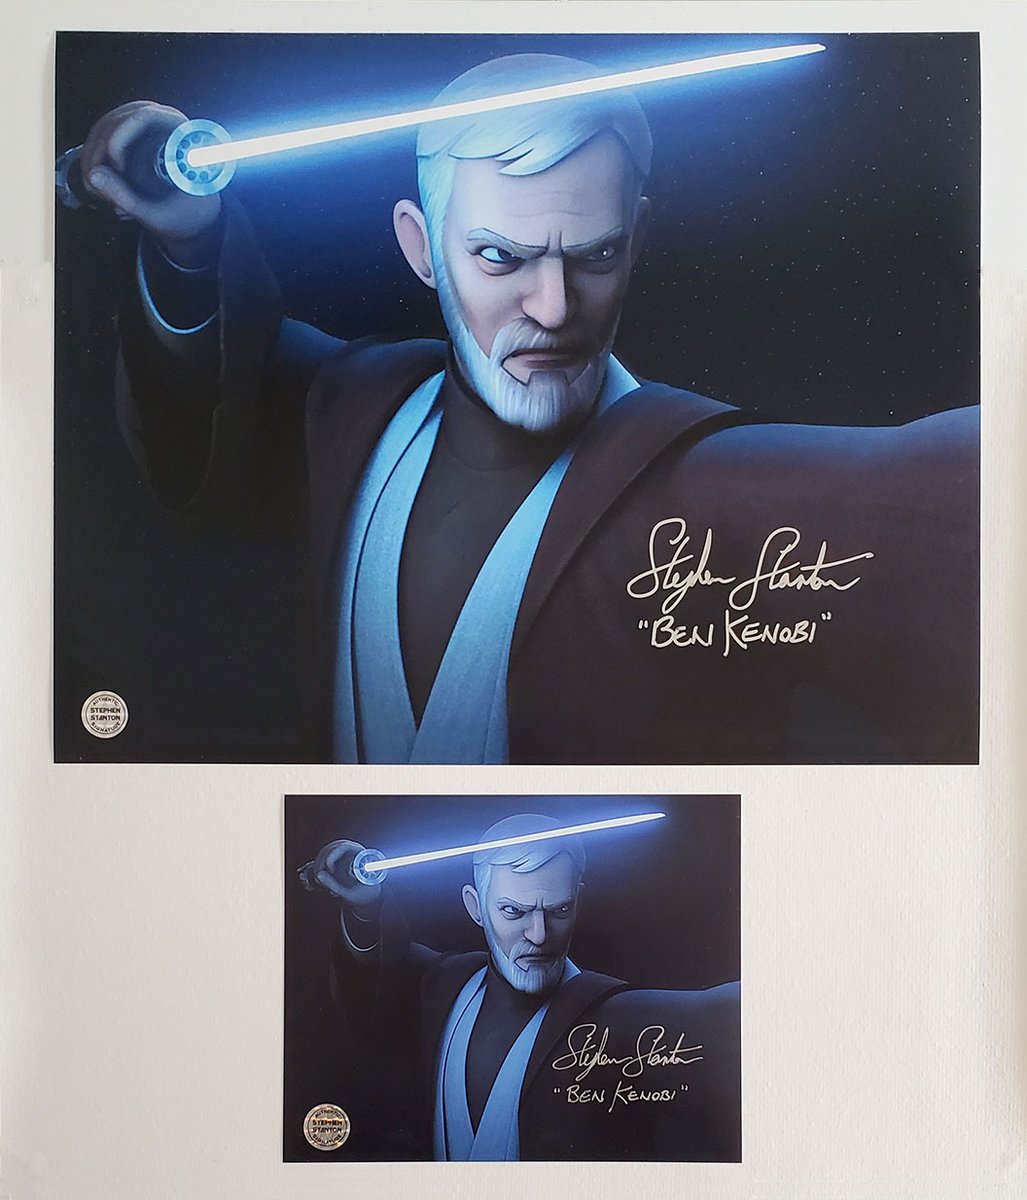 Here's my #MemorialDay #StarWars #Giveaway for a very large 16x20 #StarWarsRebels #ObiWanKenobi #TwinSuns duel photo! See the size comparison below to an 8x10 to see what you're getting! To enter RT, Like, Reply & Follow! Or Go to stephenstantononline.com for our #MayThe4th SALE⚔️